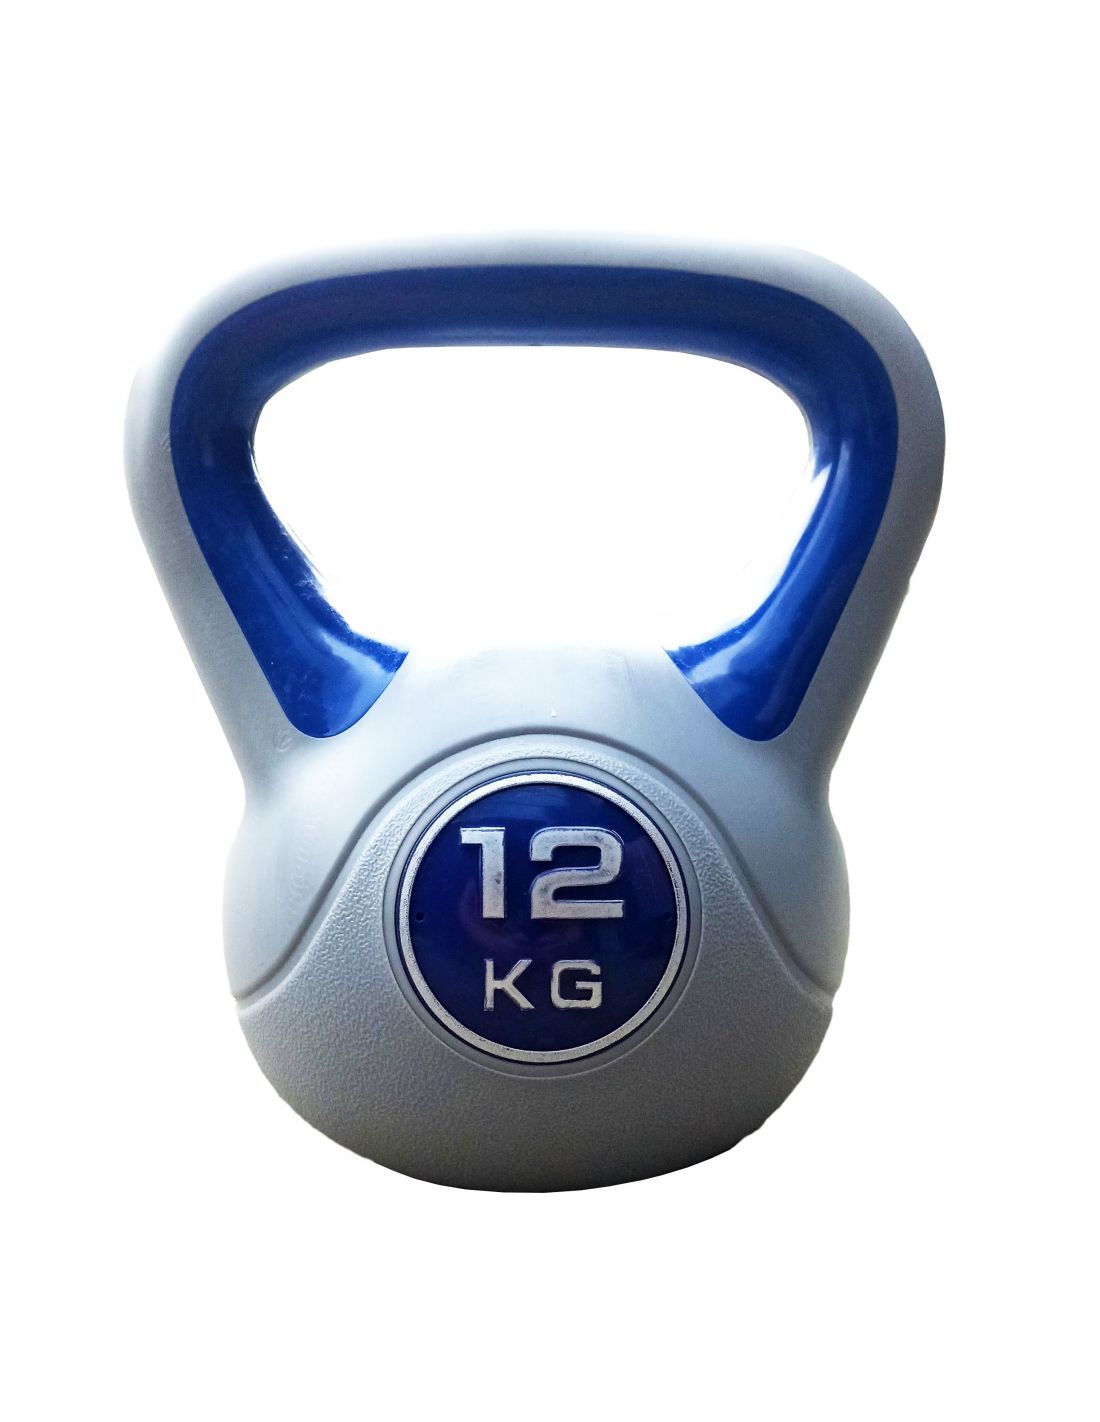 Plastic Kettlebell 12kg - 20kg (Thick Handle - No Exchange or